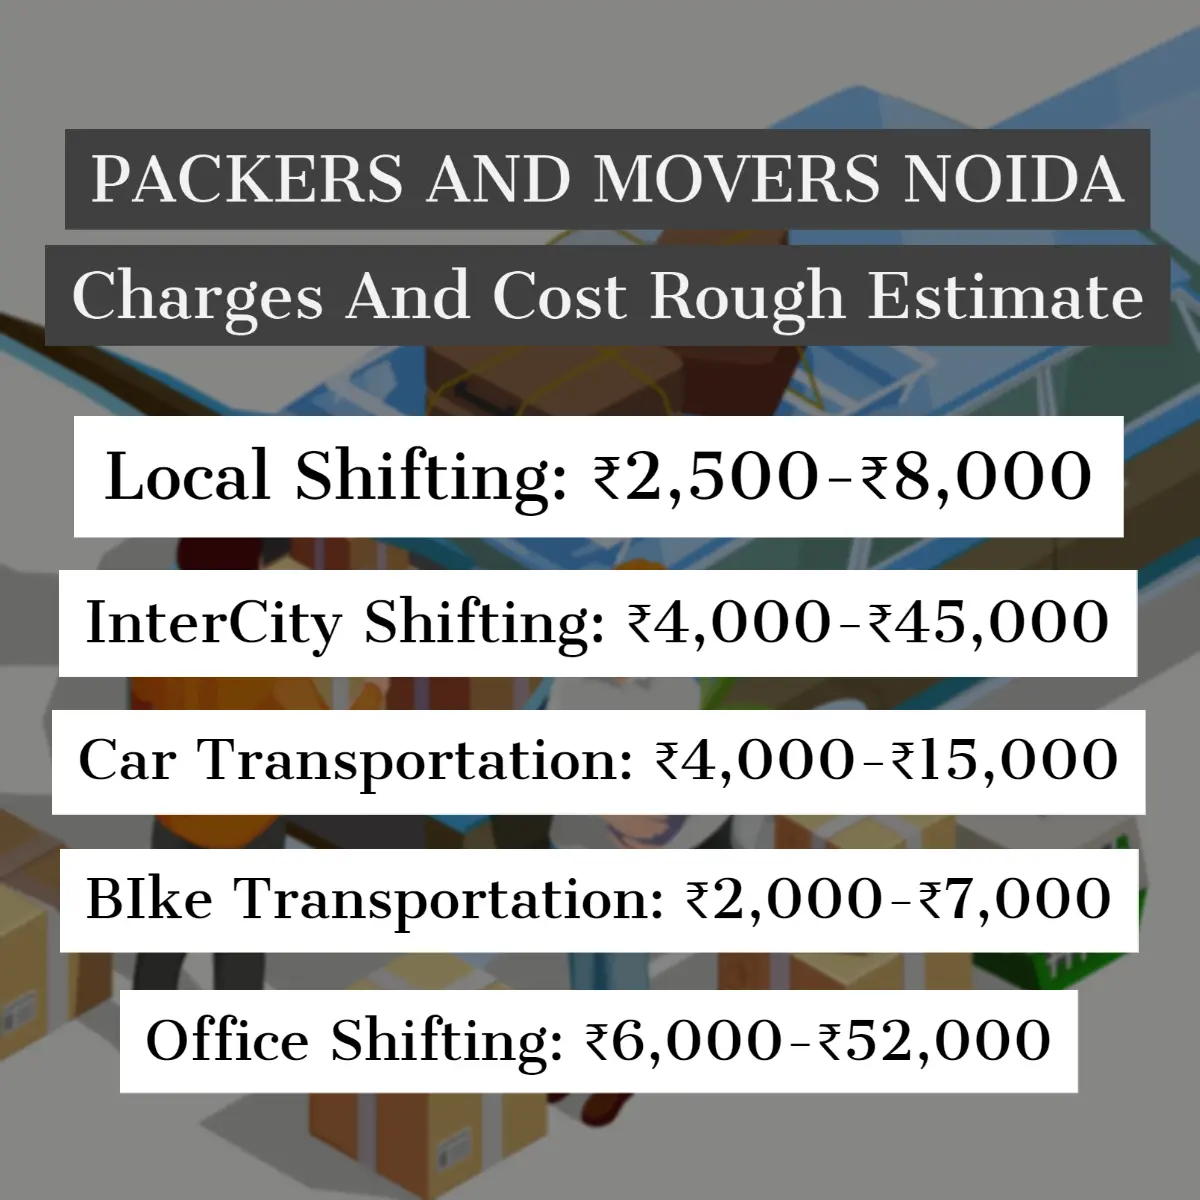 Packers and Movers Noida Charges